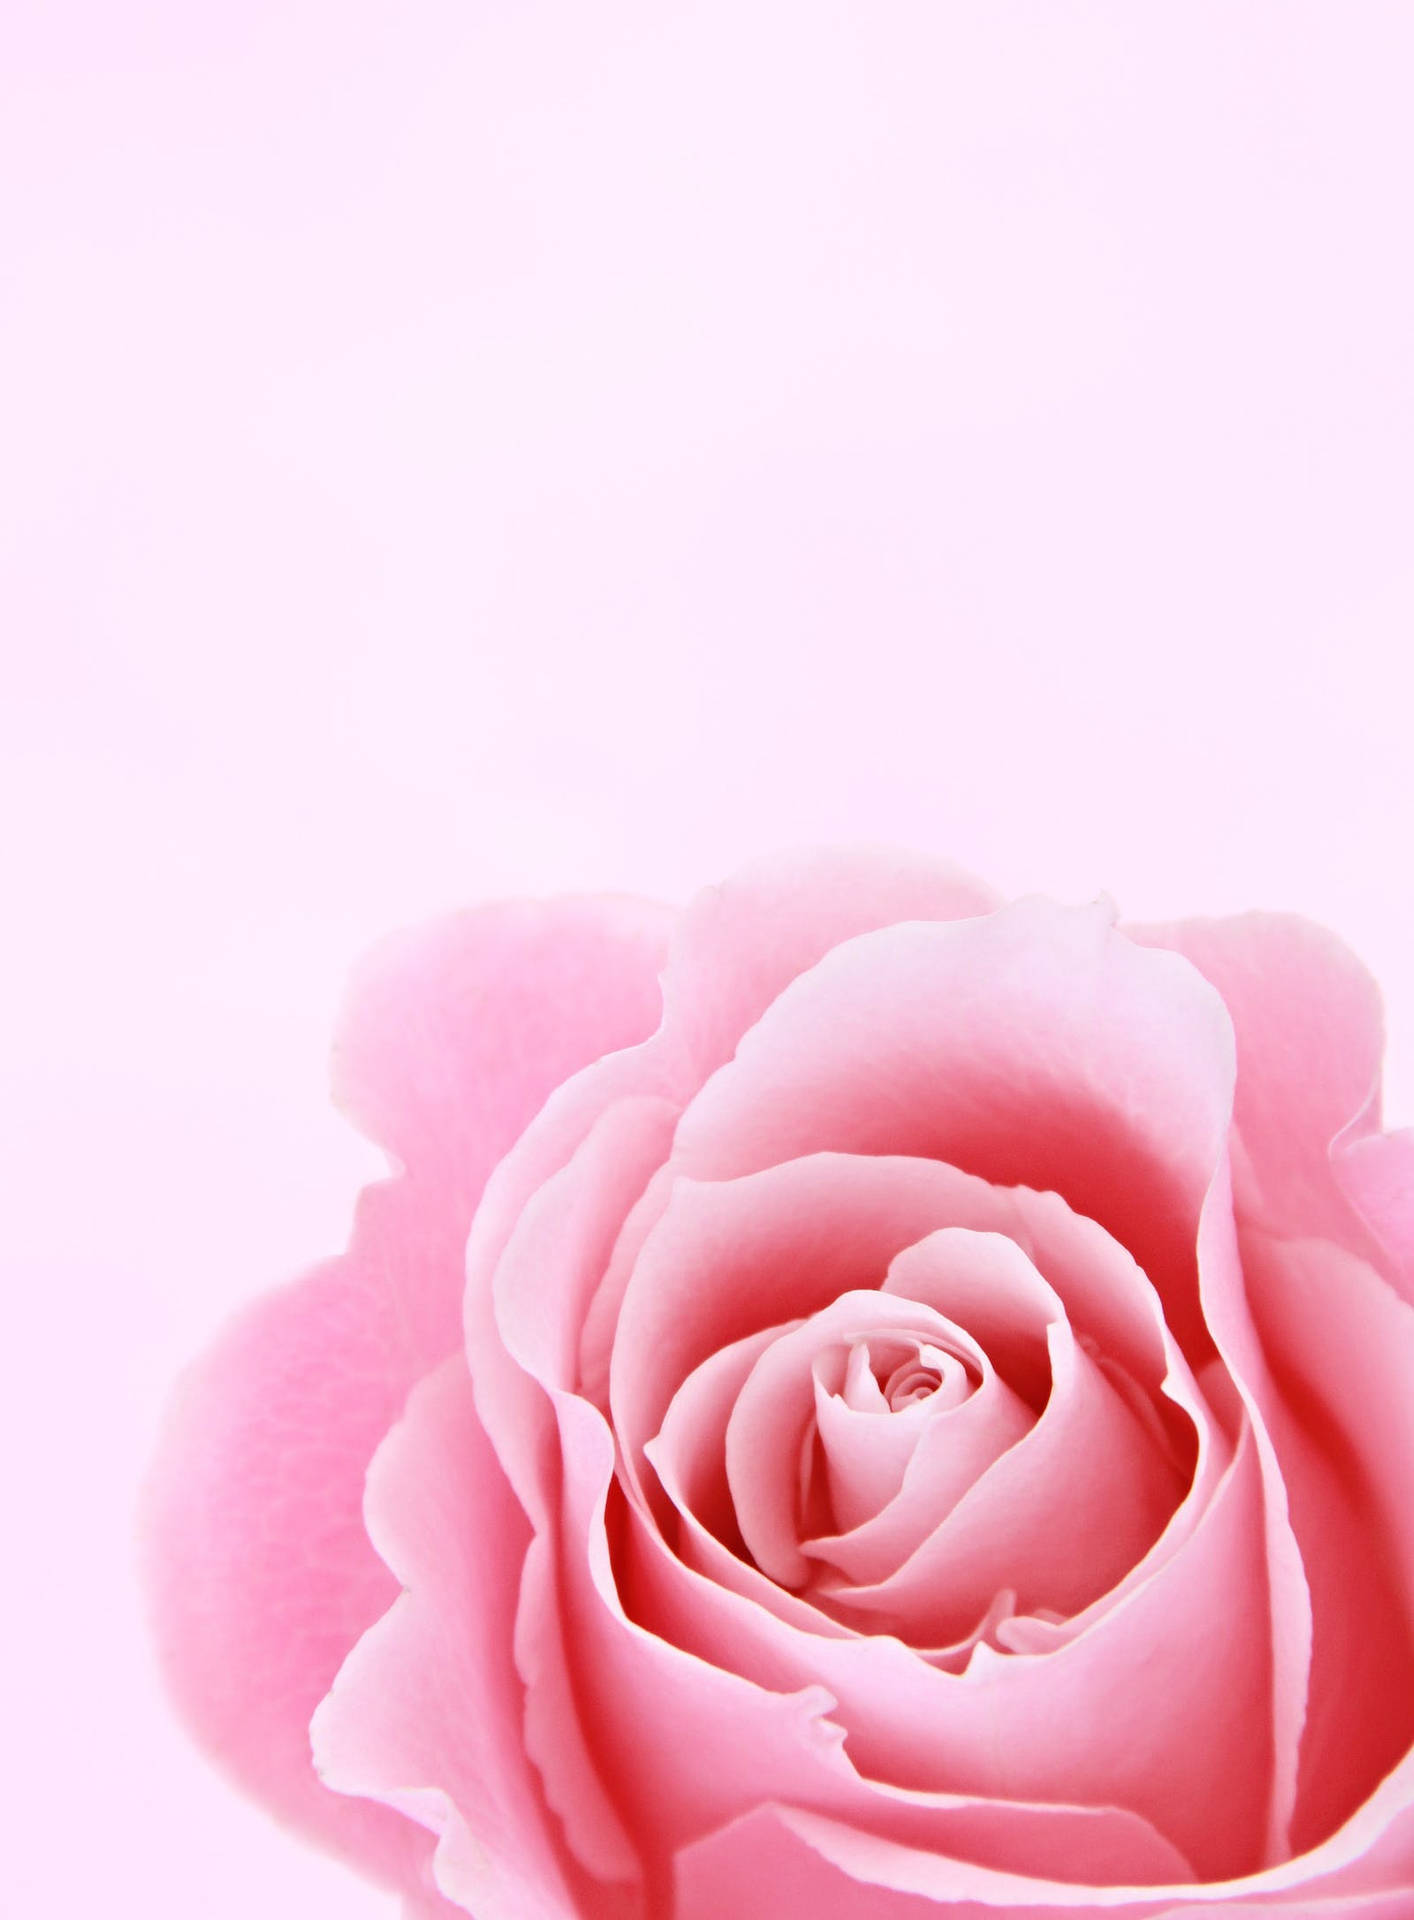 Free Rose Iphone Wallpaper Downloads, [200+] Rose Iphone Wallpapers for  FREE 